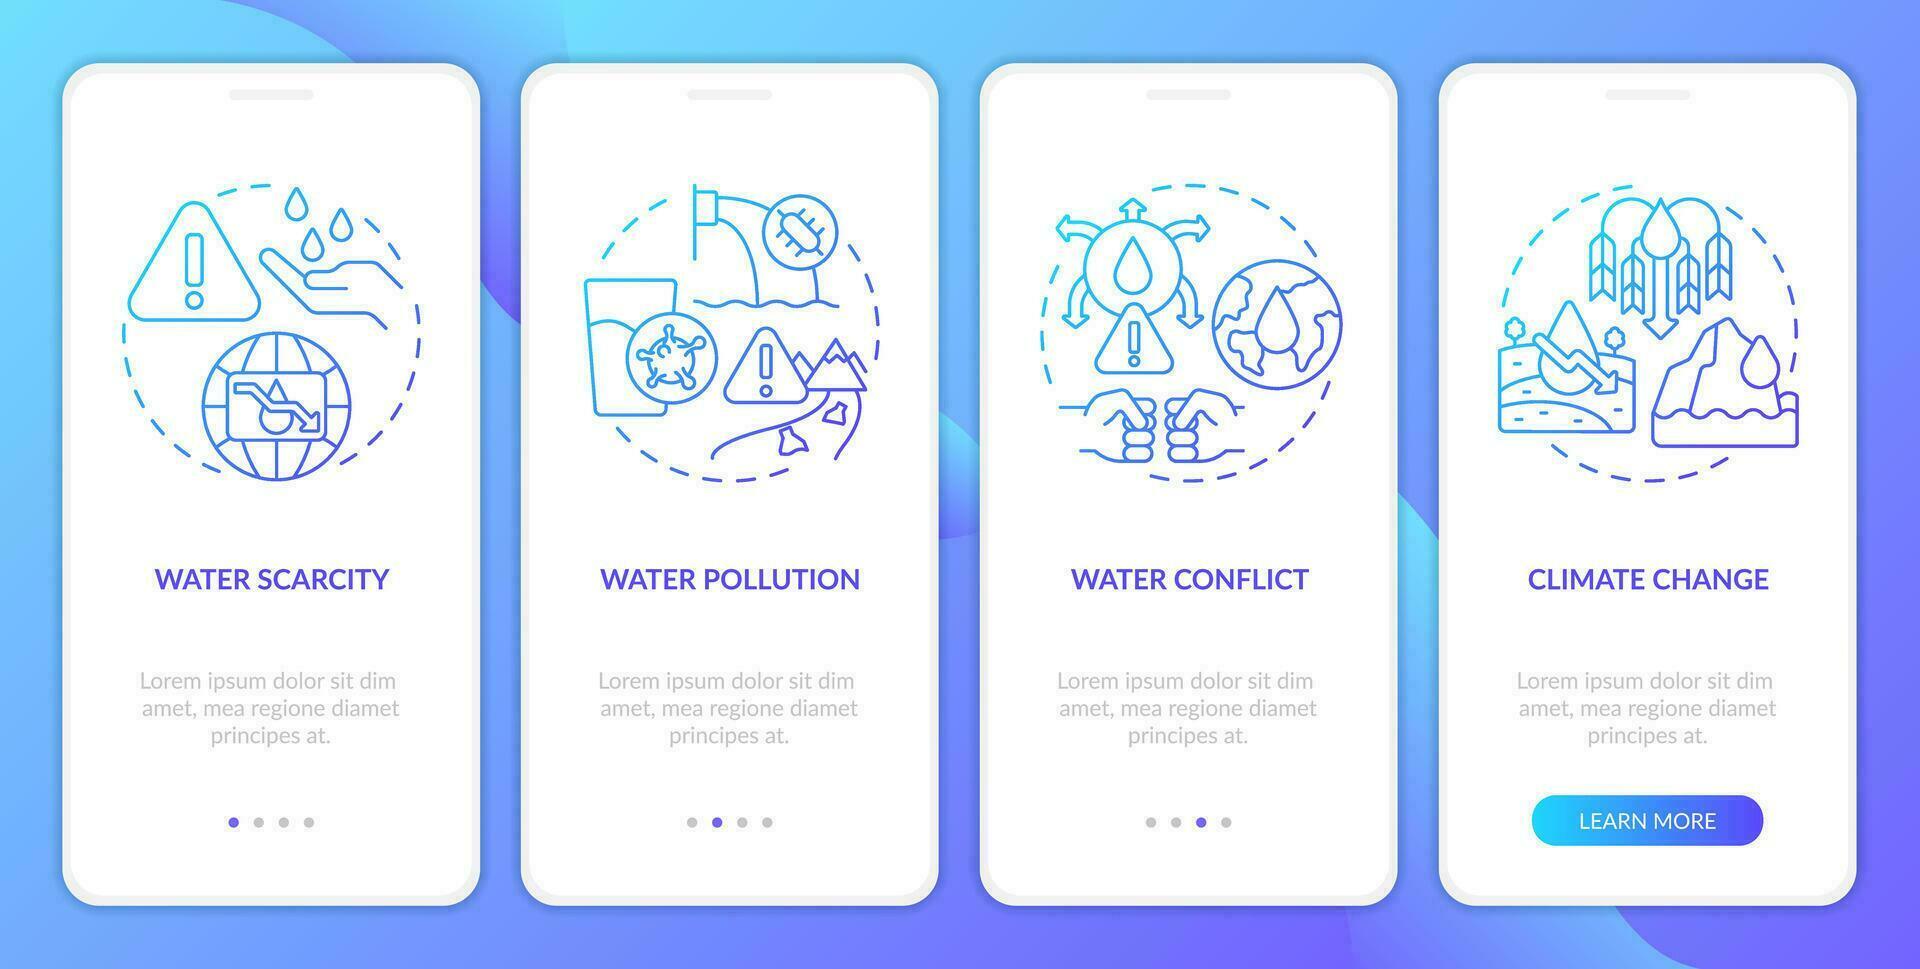 Water source threats blue gradient onboarding mobile app screen. Dangers walkthrough 4 steps graphic instructions with linear concepts. UI, UX, GUI template vector